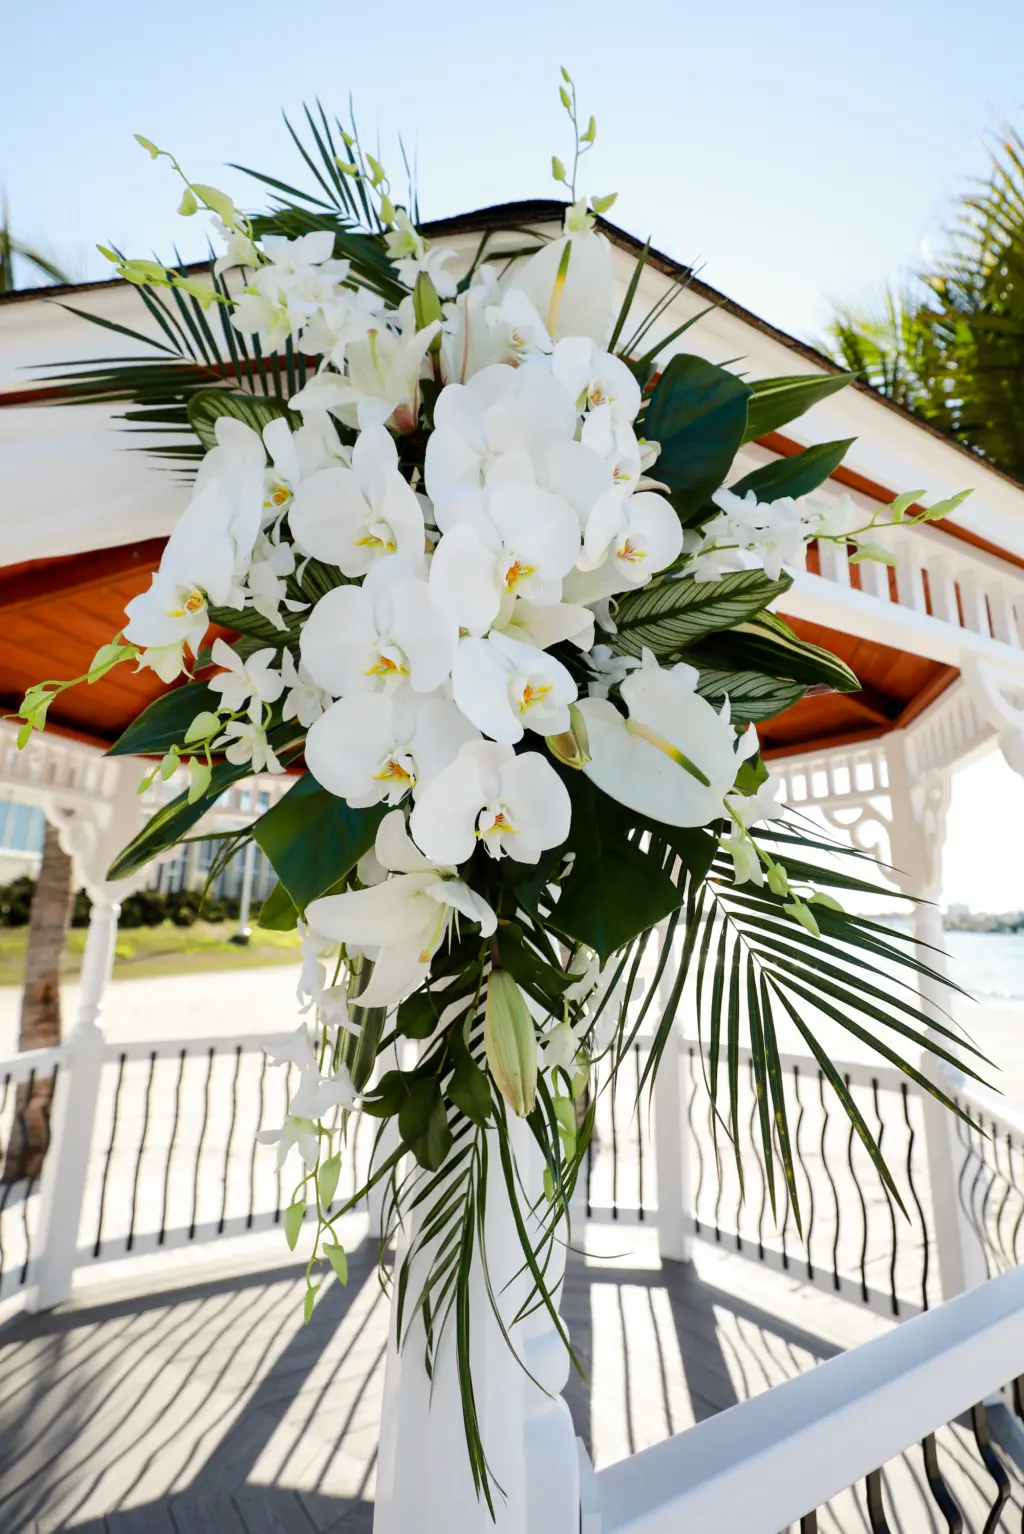 Tropical White Orchids, Stock Flowers, and Greenery Floral Arrangements for Old Florida Wedding Ceremony Gazebo Backdrop Ideas